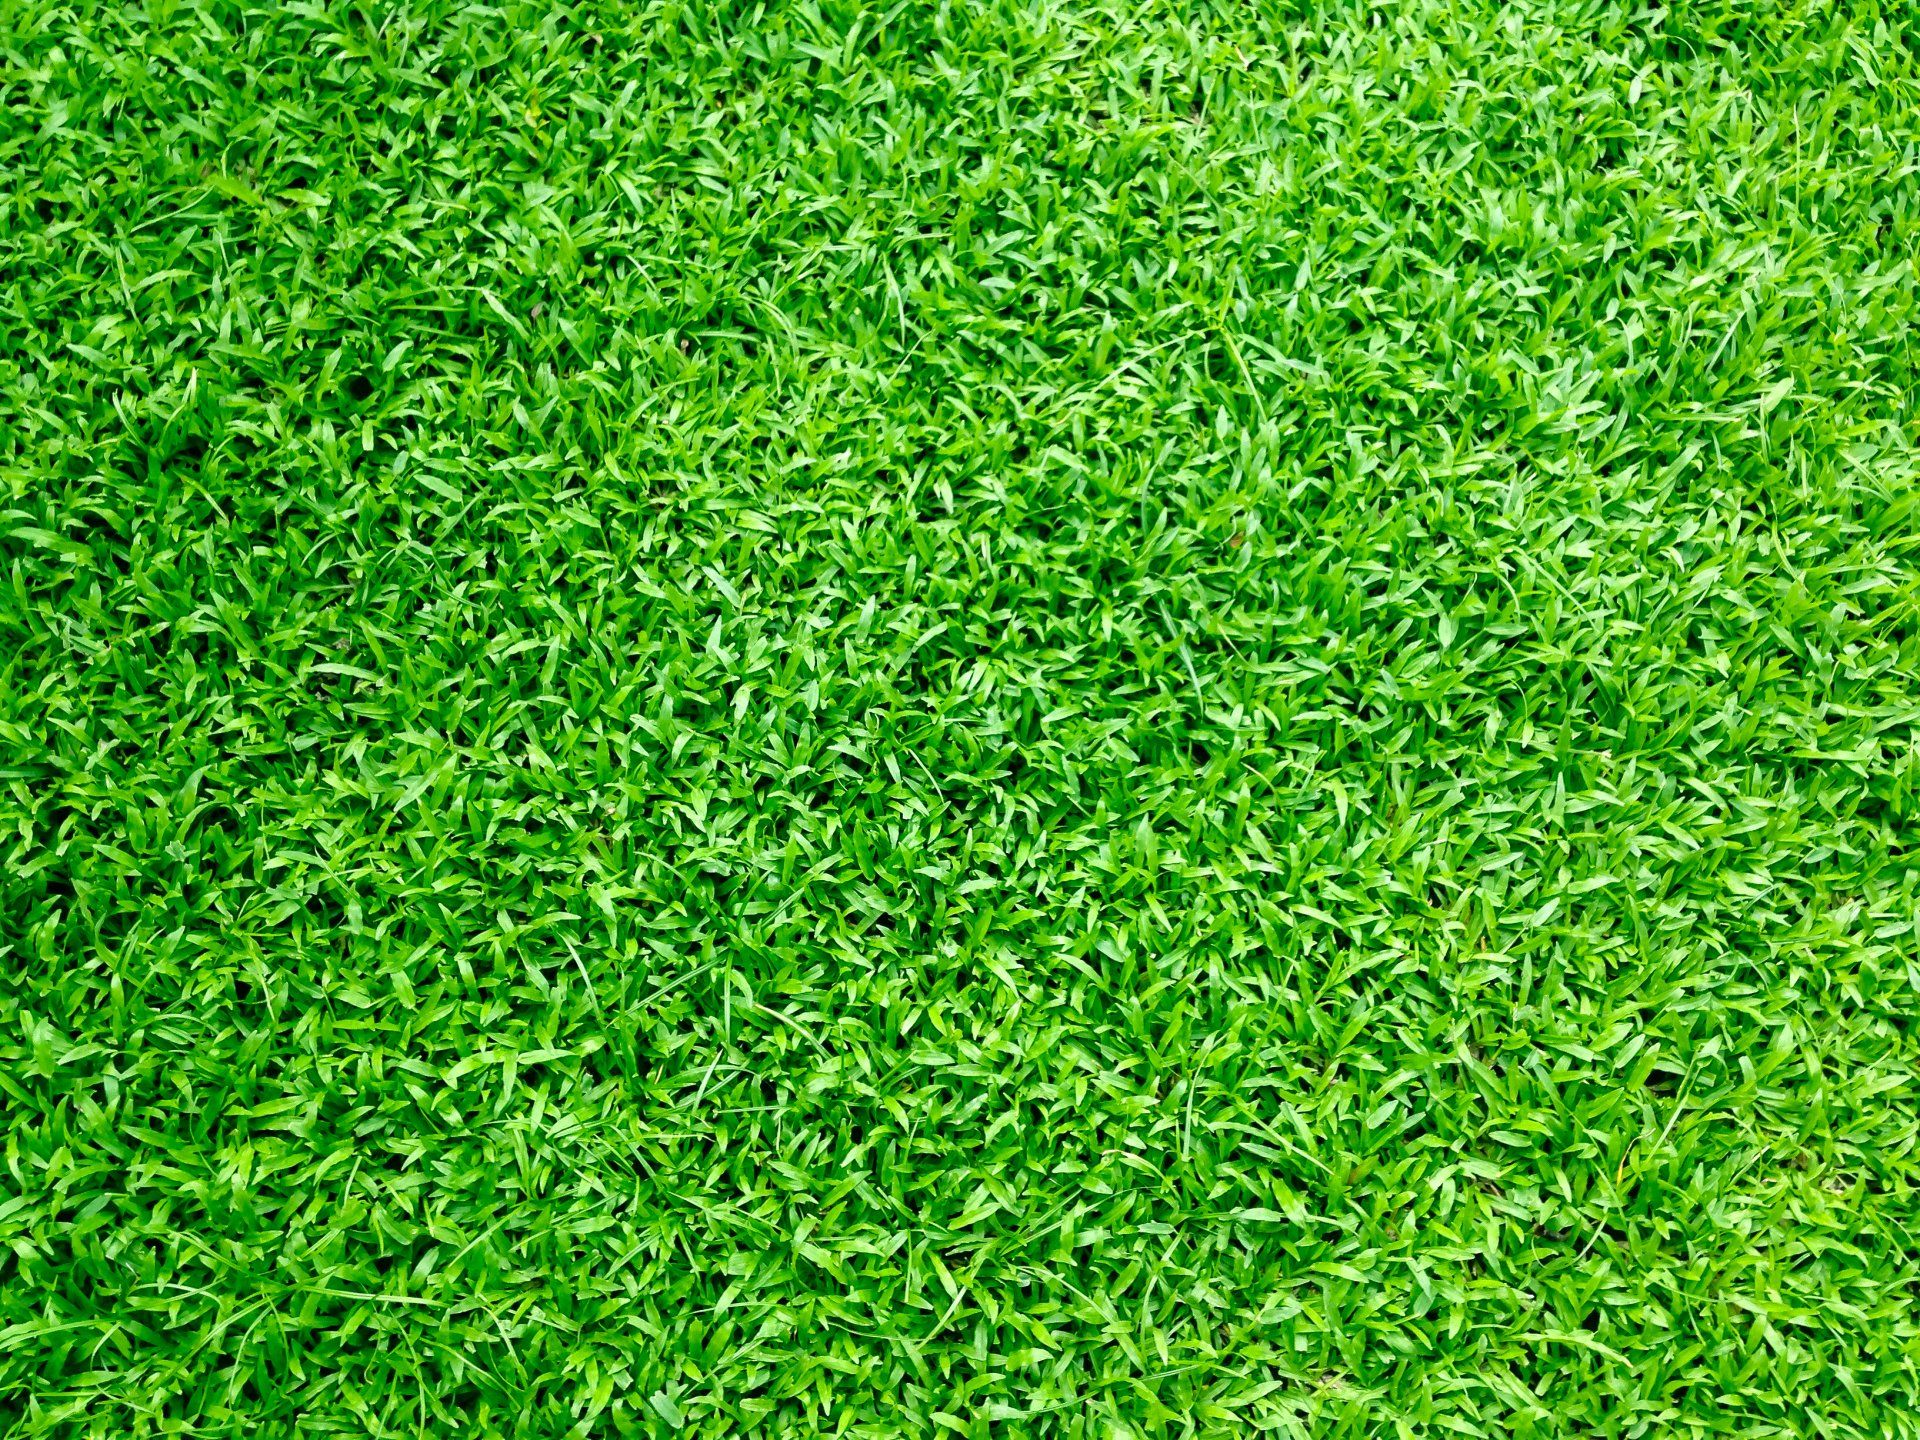 Unraveling the Facts About Artificial Turf and Cancer Concerns